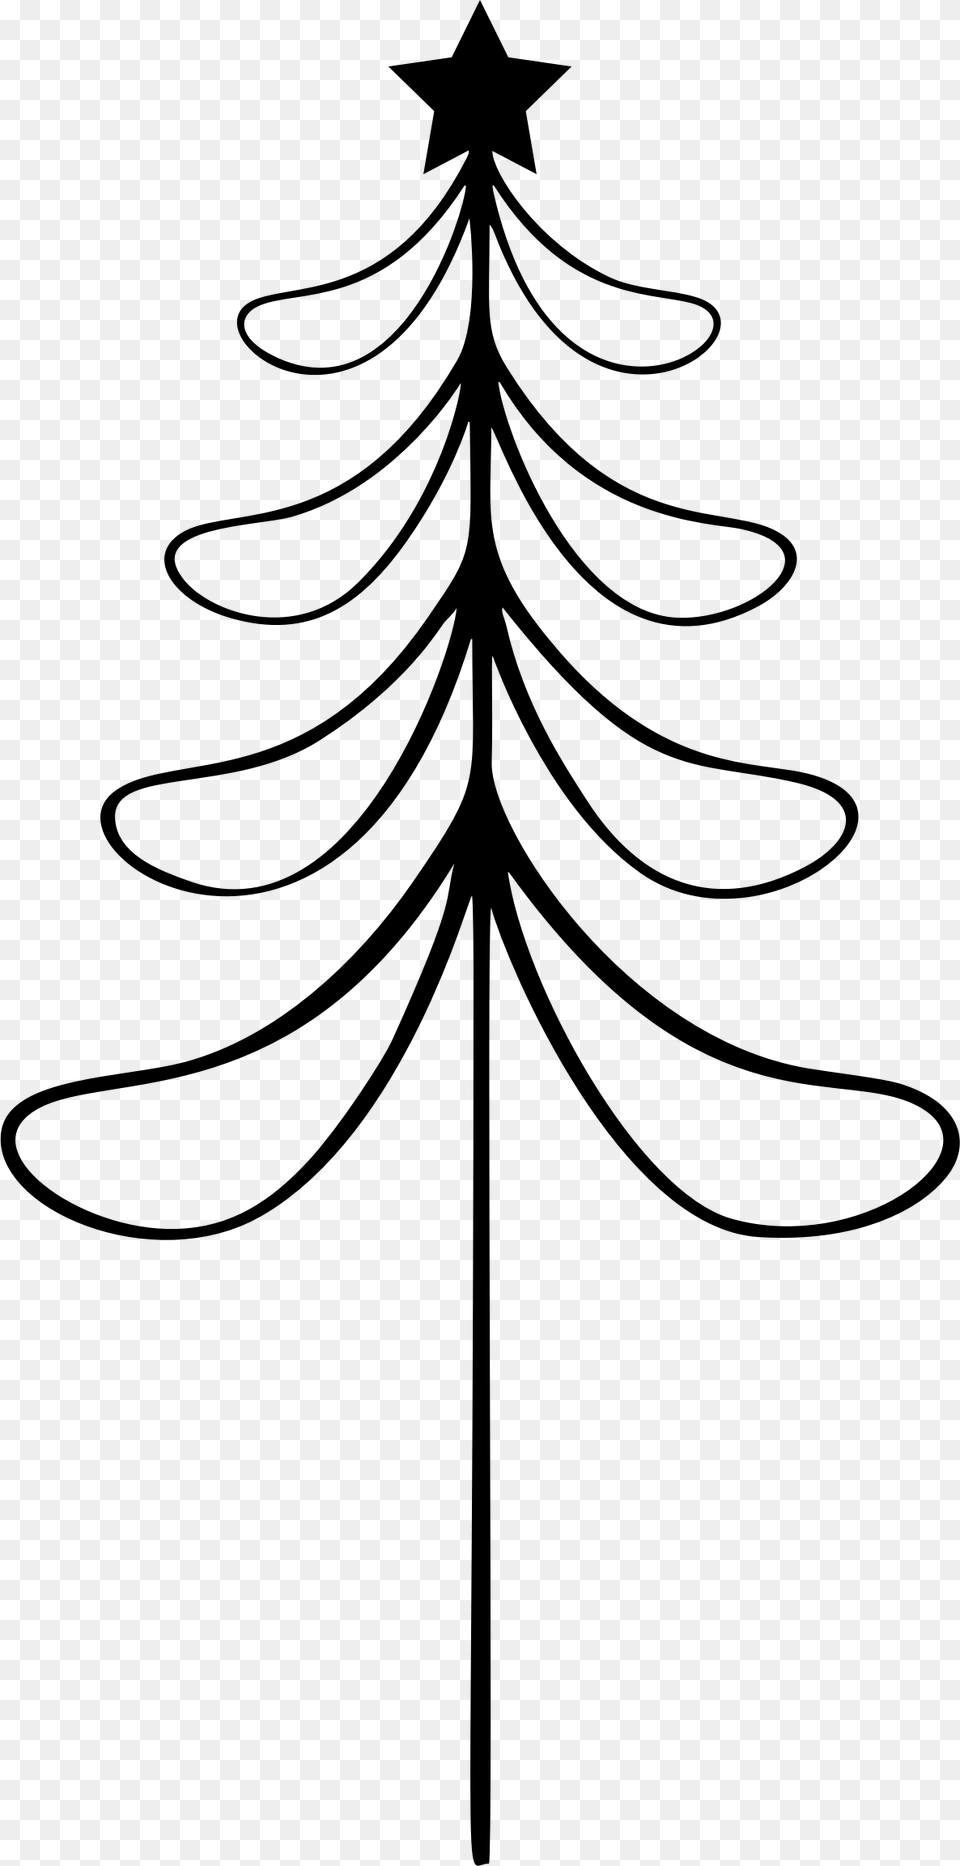 Abstract Christmas Tree Line Art 2 Clip Arts Line Art, Gray Free Transparent Png